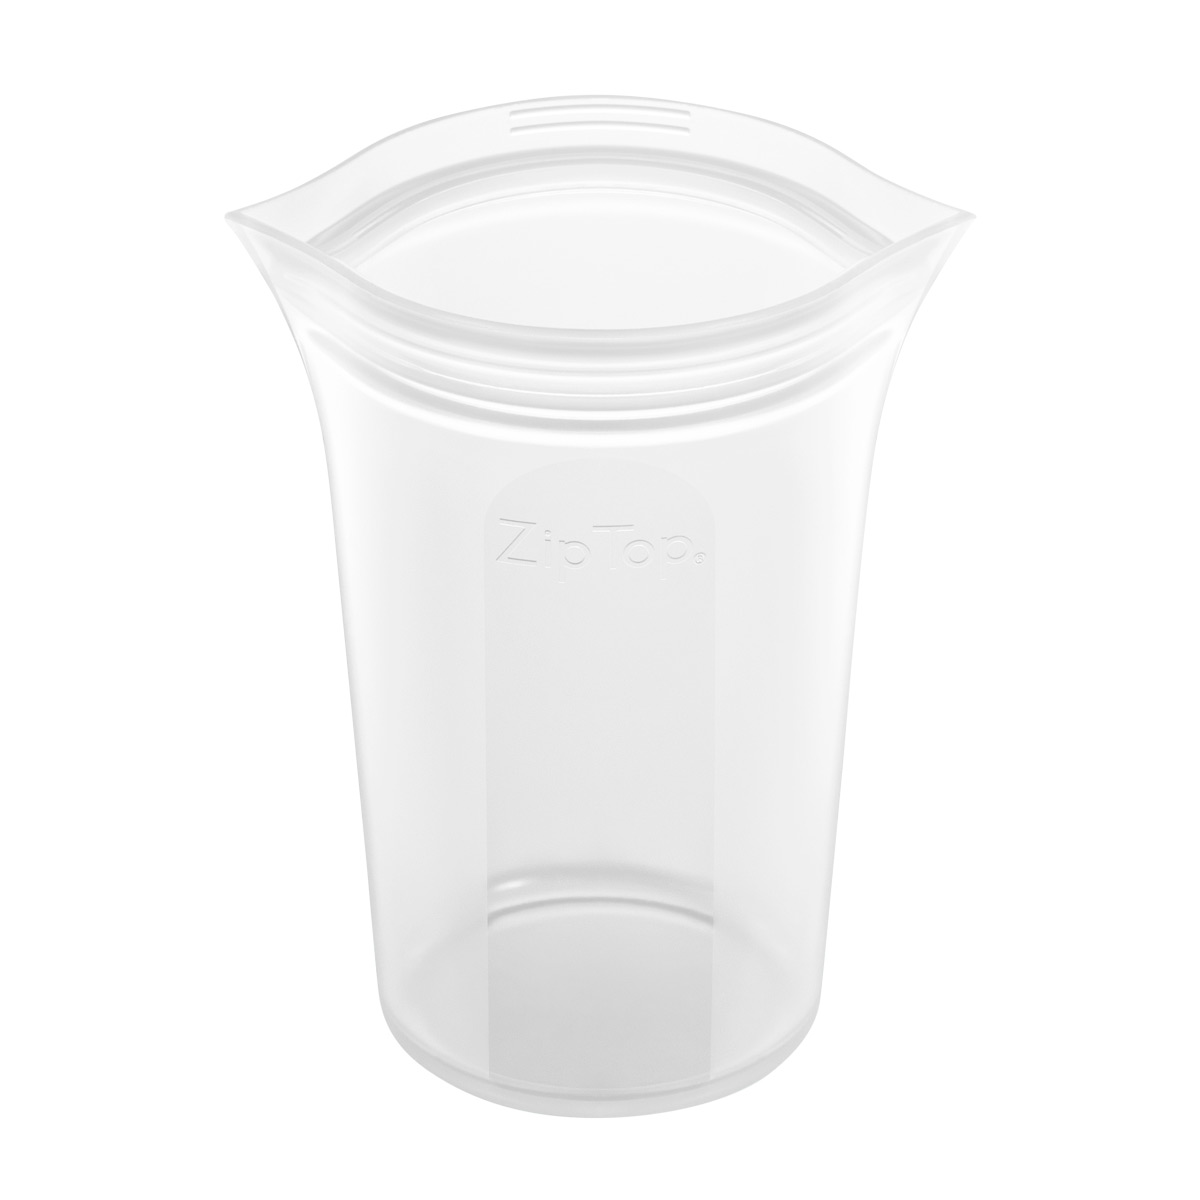 https://www.containerstore.com/catalogimages/435955/10083591-Frost-Cup-50-Medium-VEN.jpg